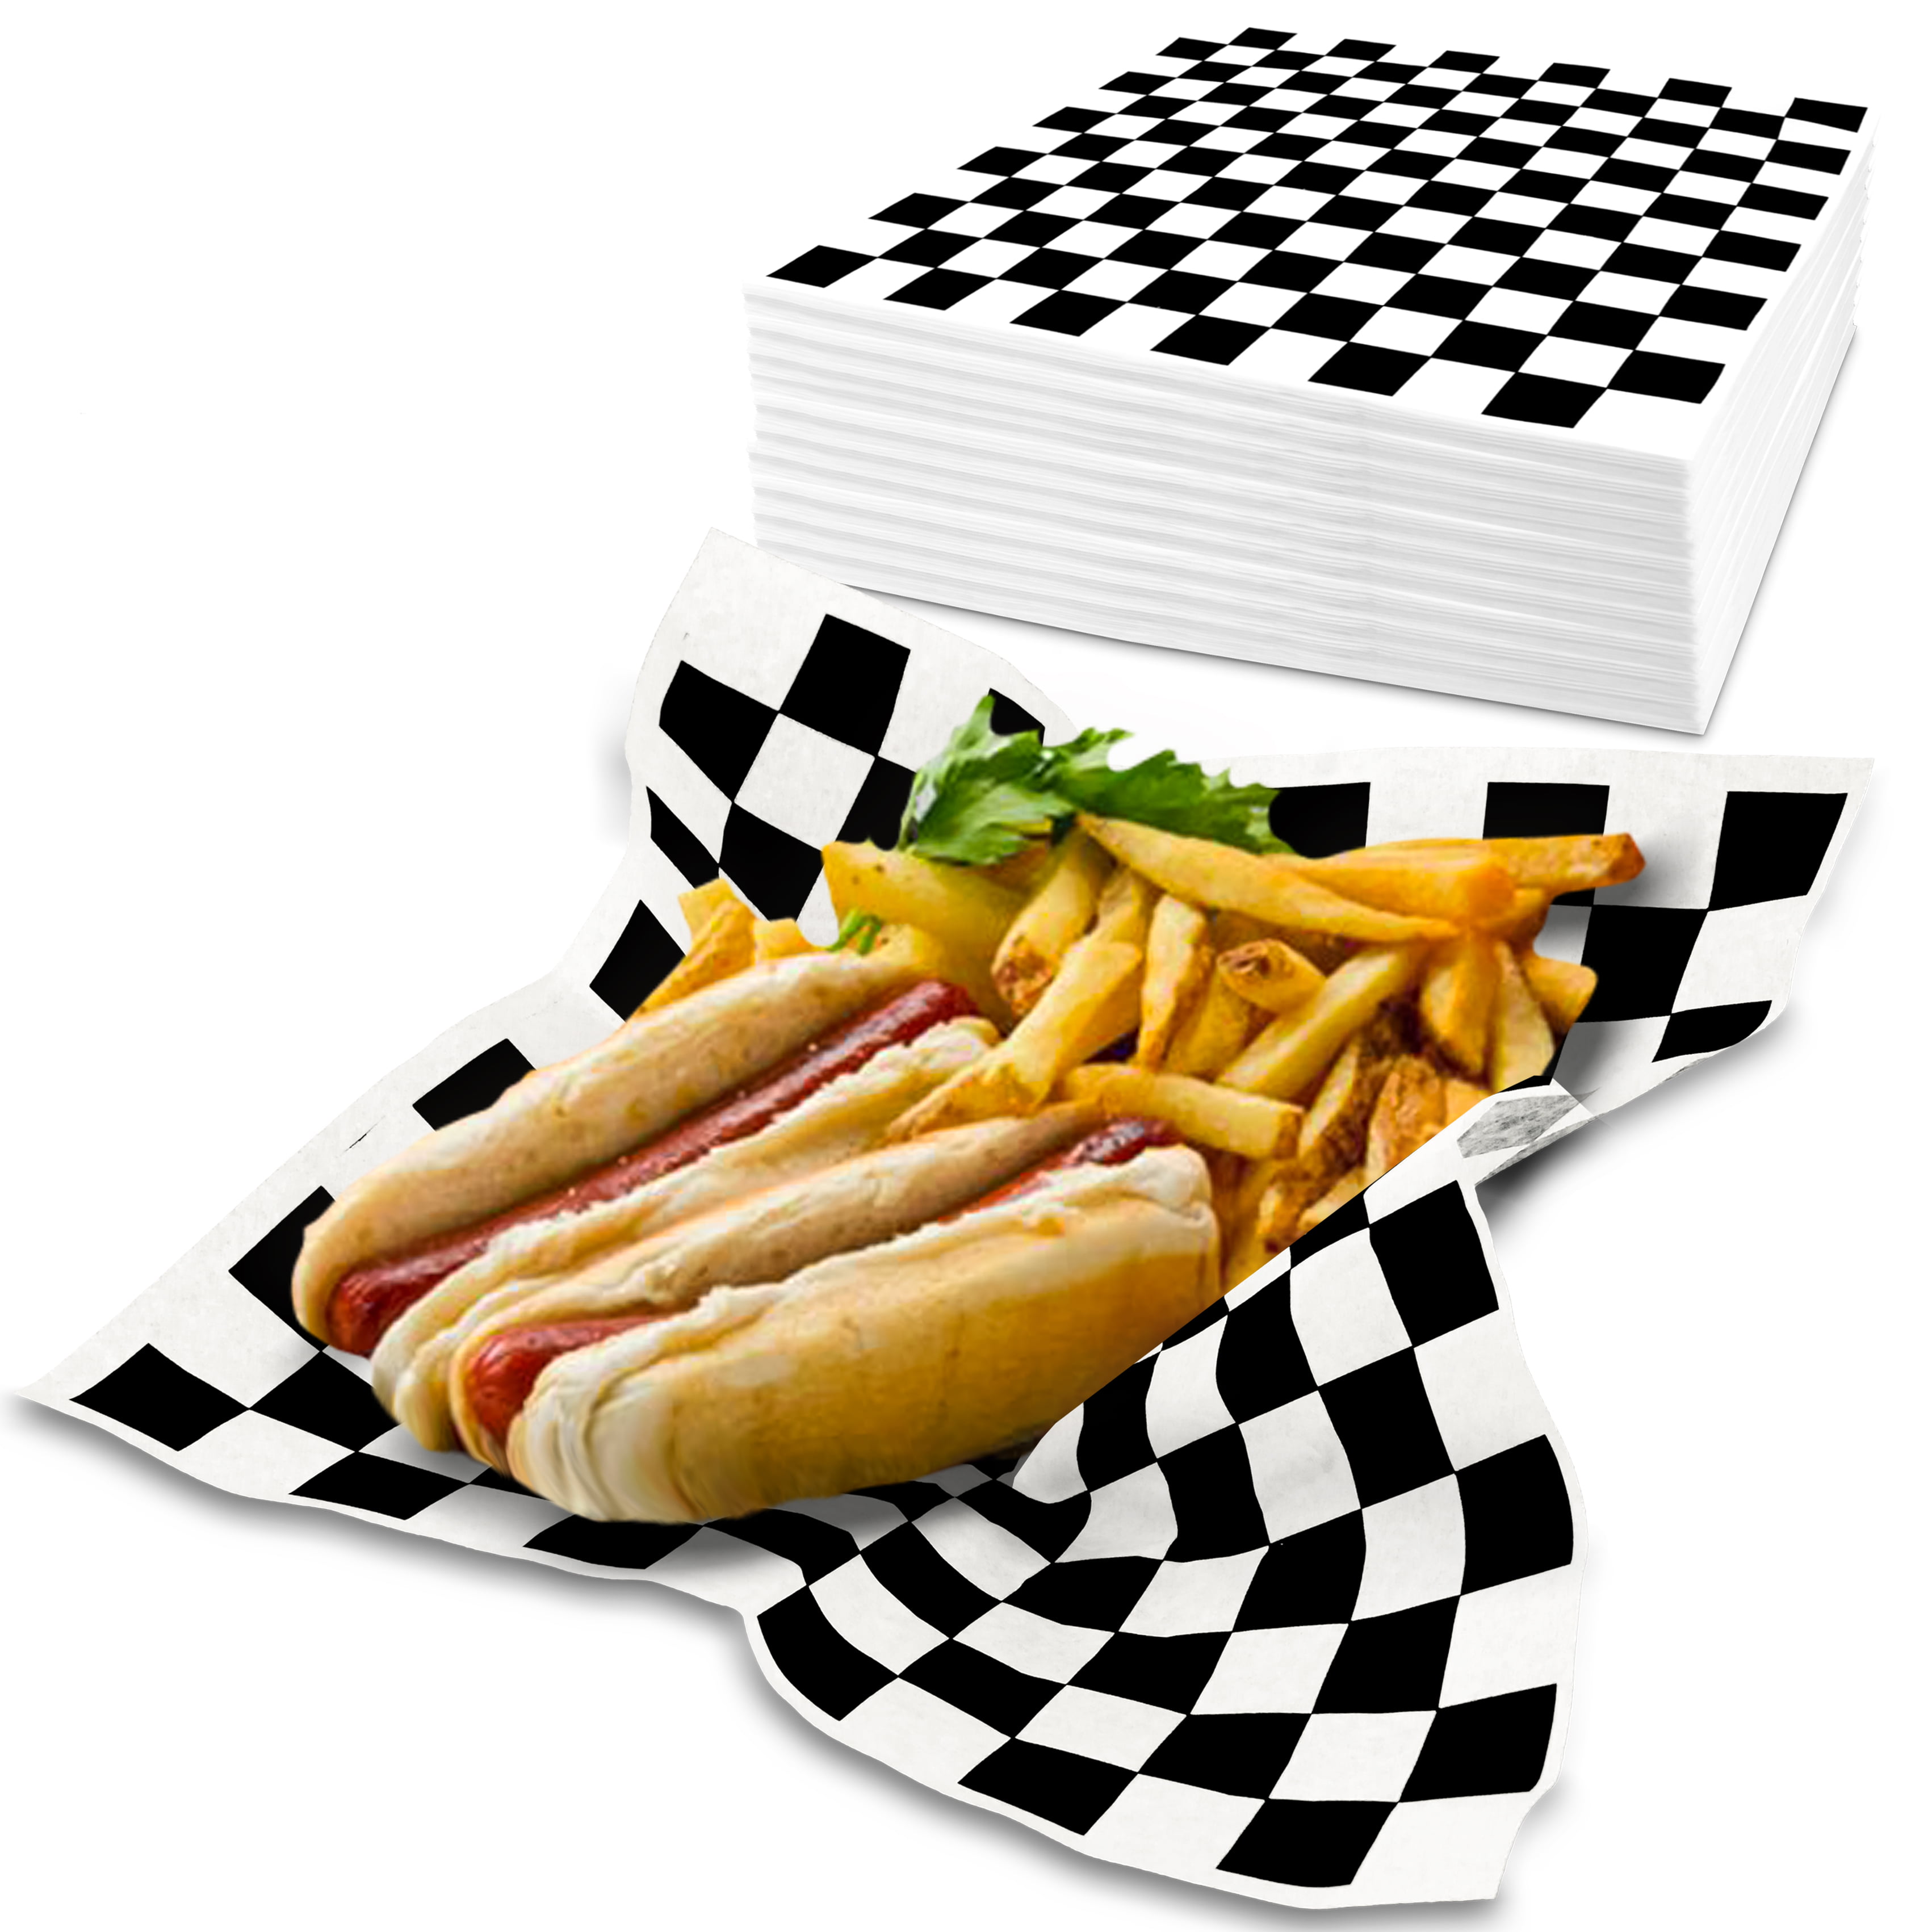 Themed Favors 100 America Newsprint Paper Deli Sandwich Wraps 12 x 12 Party Sports Events Cafe 